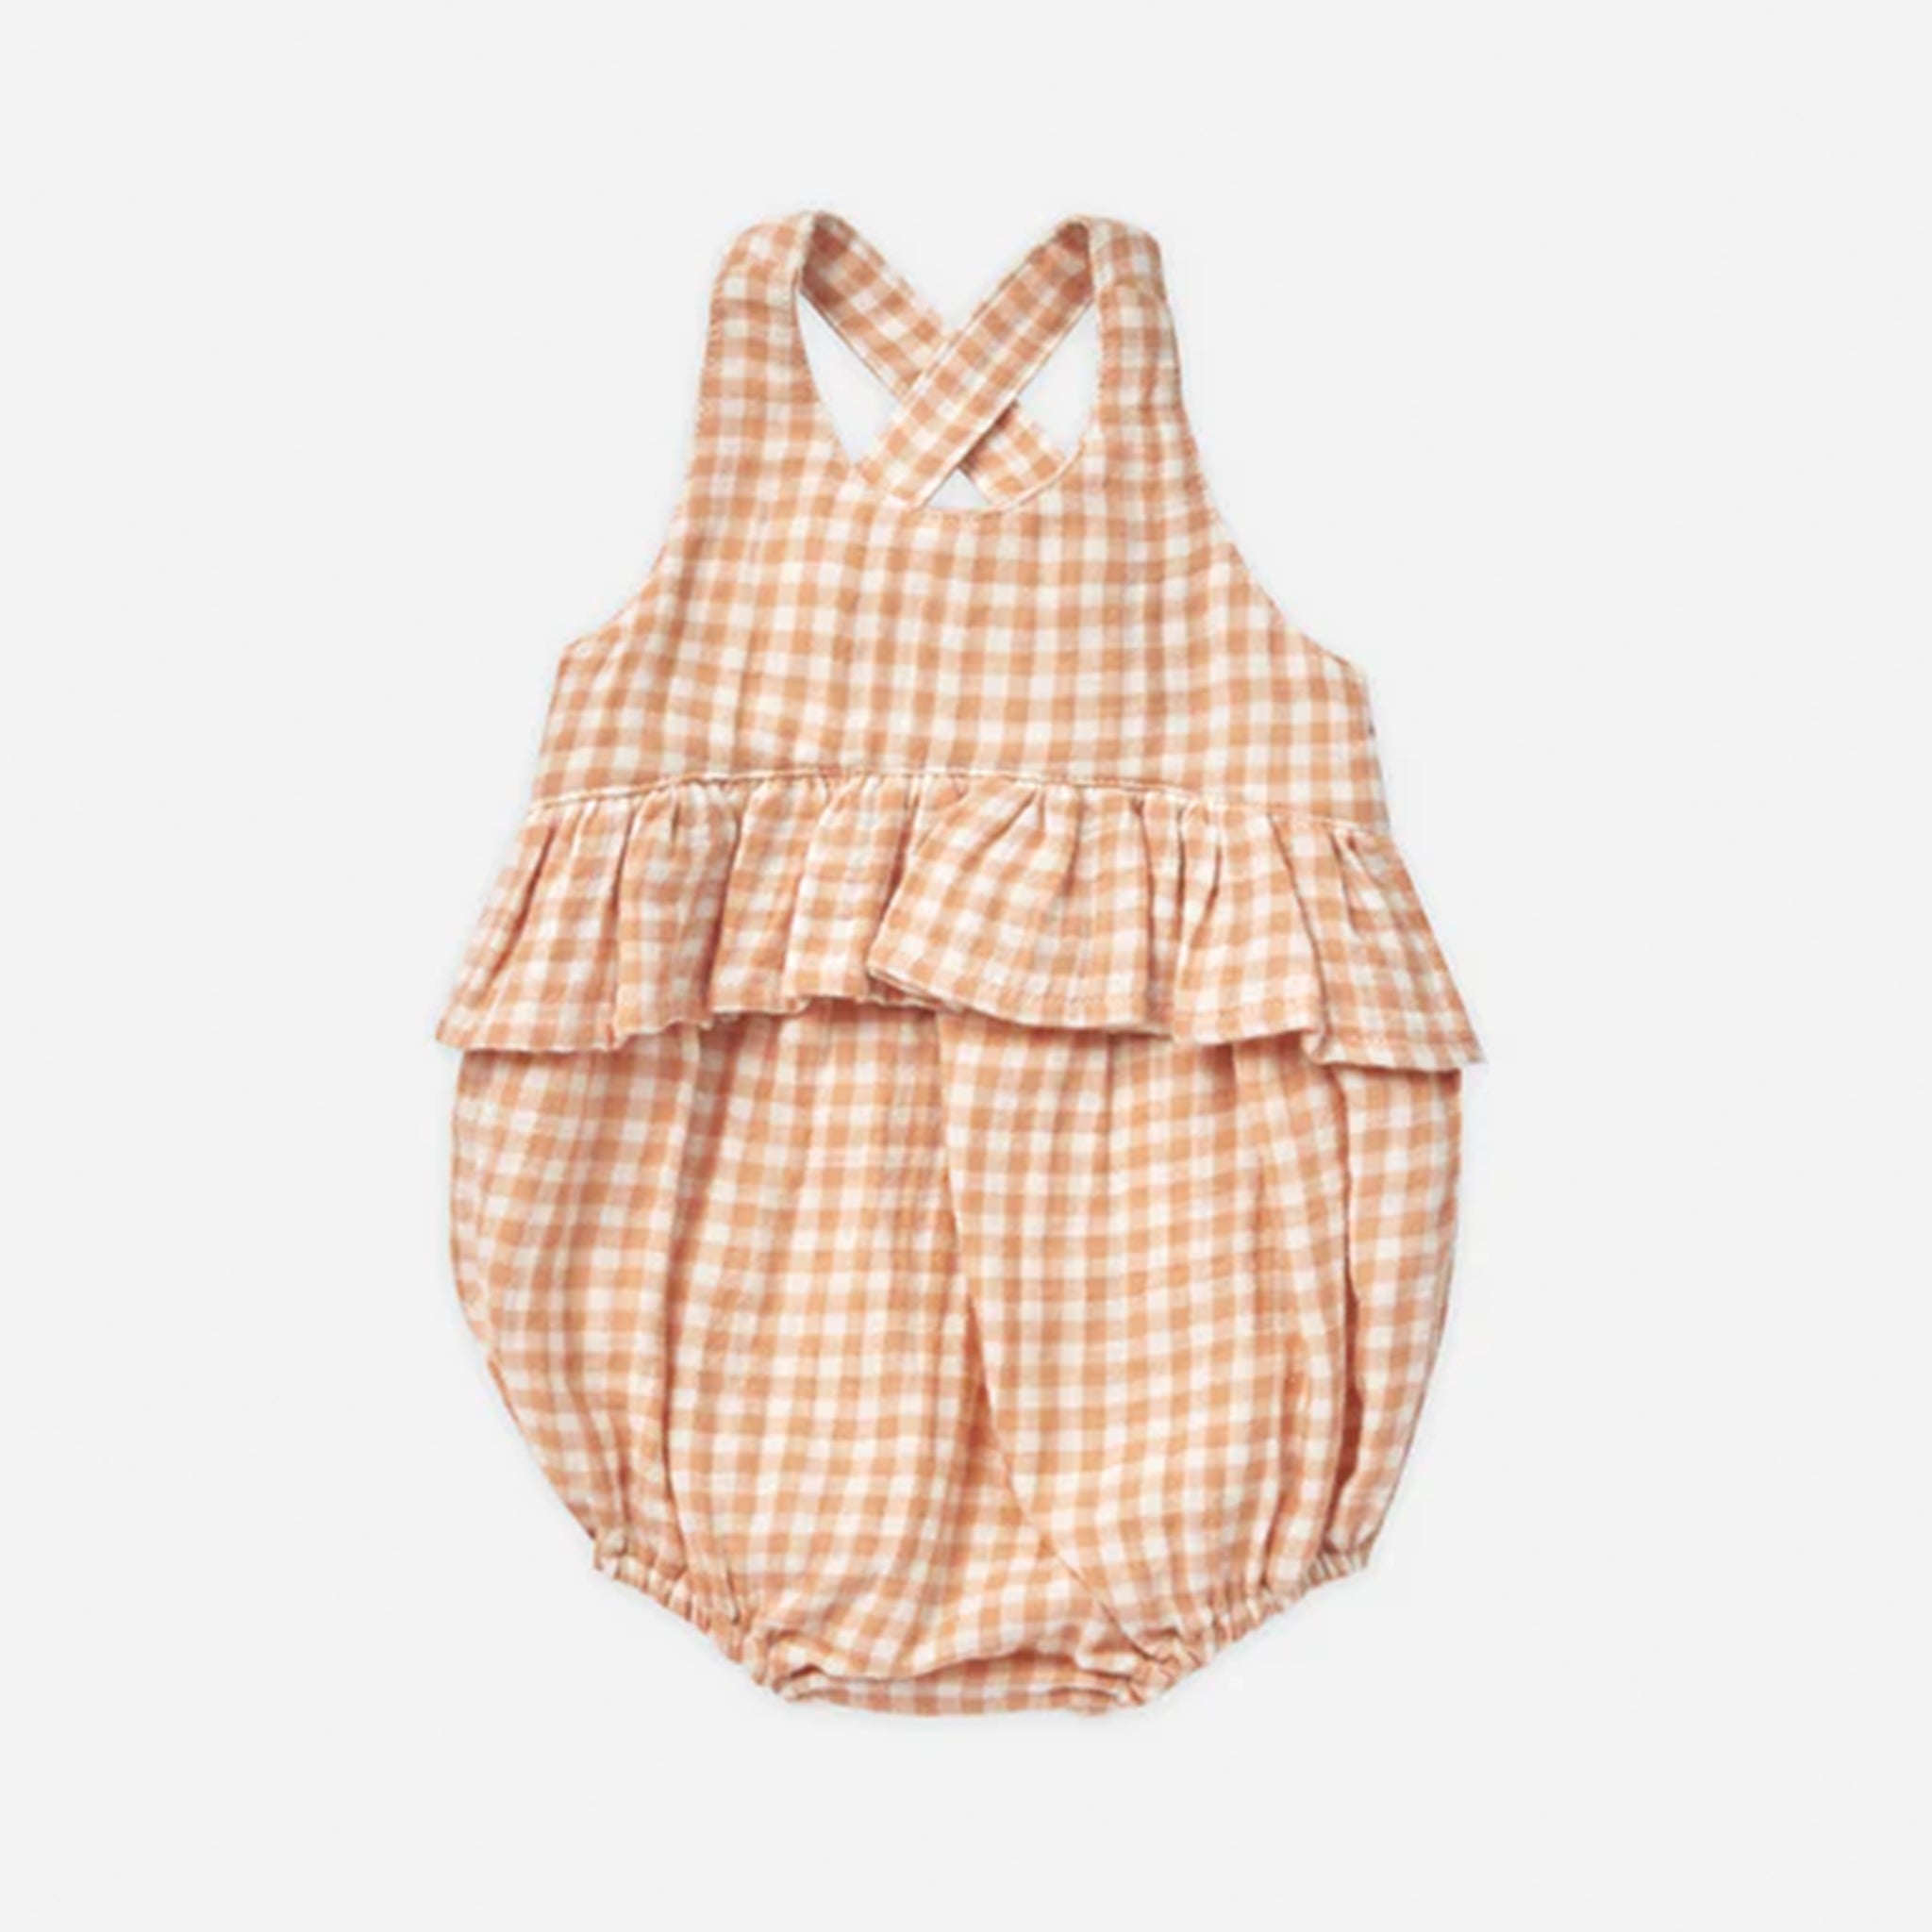 An ivory and light orange one piece children's romper with a criss cross detail on the back and snap closures on the bottom for easy changing.